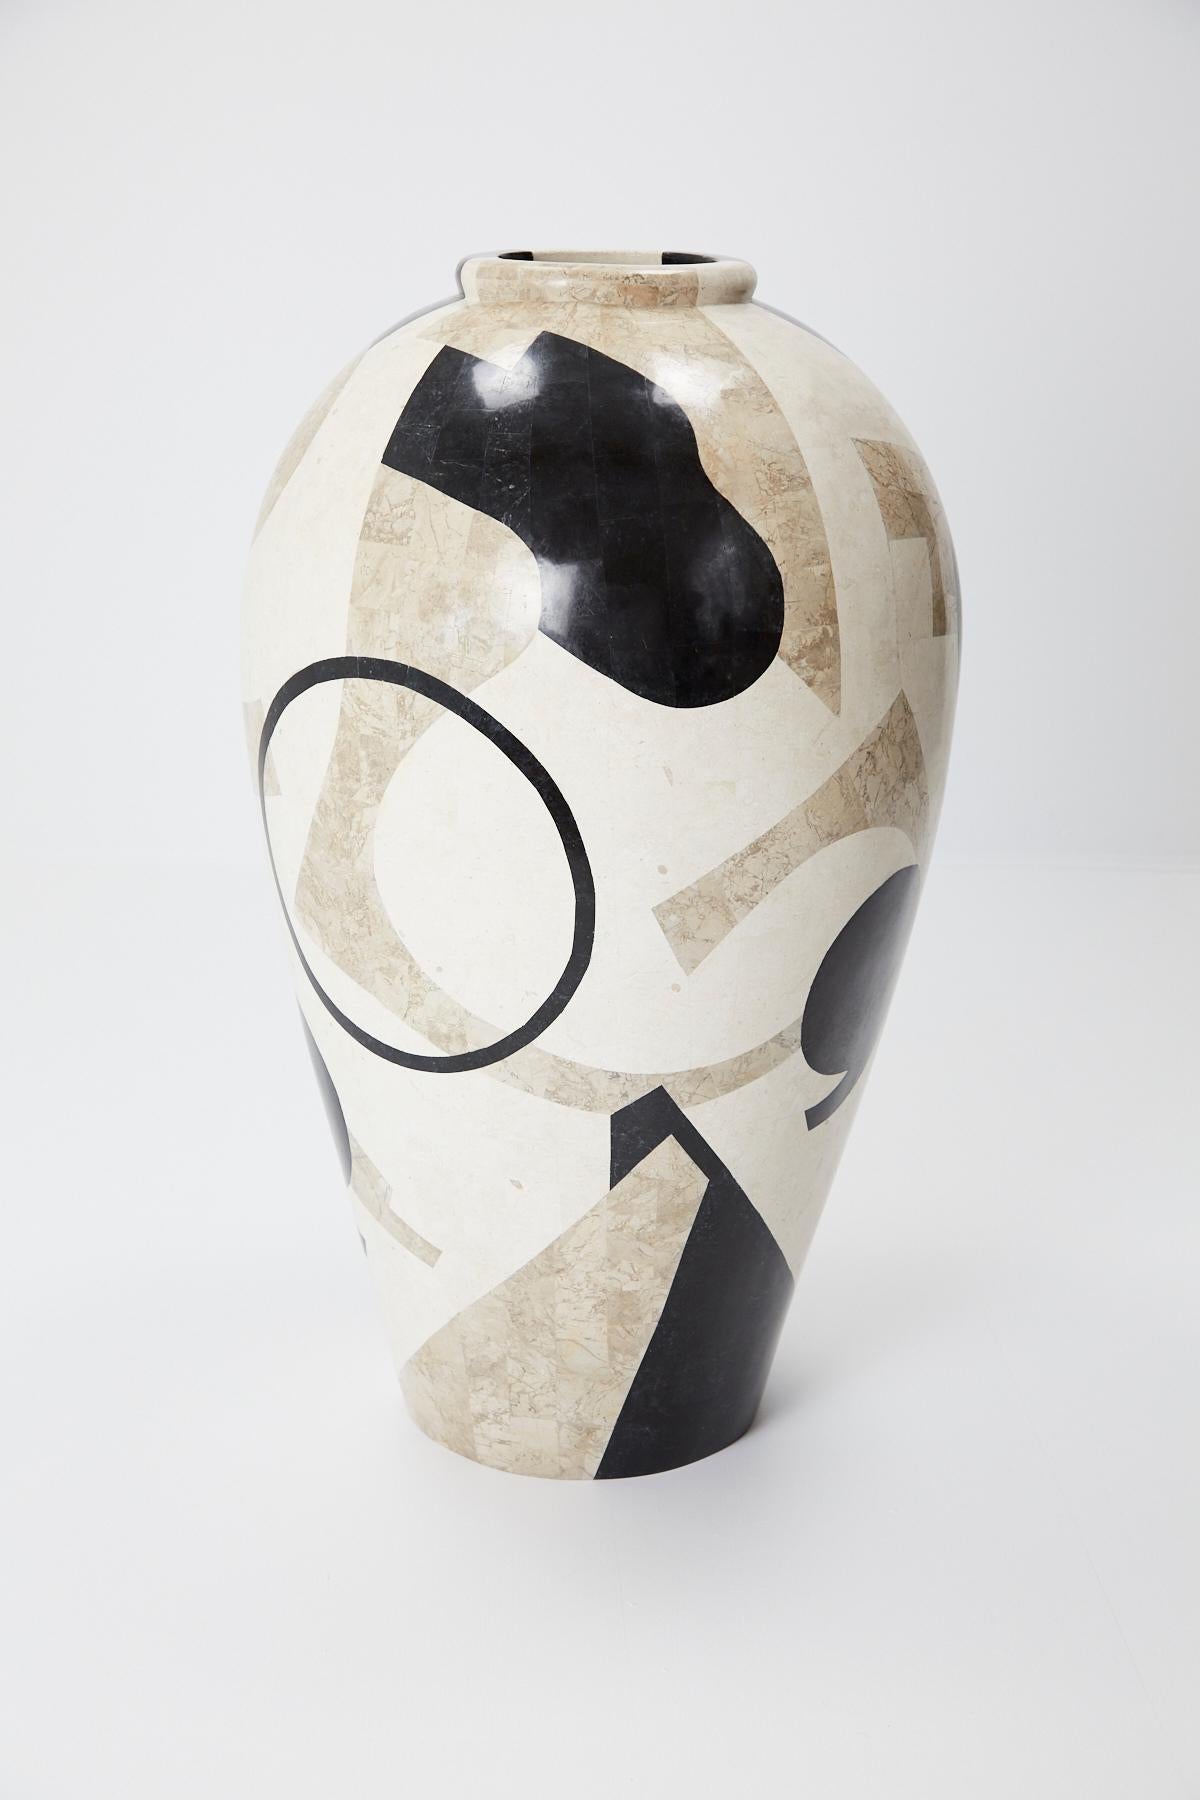 Extra large, oversized mango jar executed in fiberglass with black, cream, and tan tessellated stone covering the exterior in a fun postmodern pattern. Excellent size for a floor vase or planter. Measures 42 in. tall.

All furnishings are made from